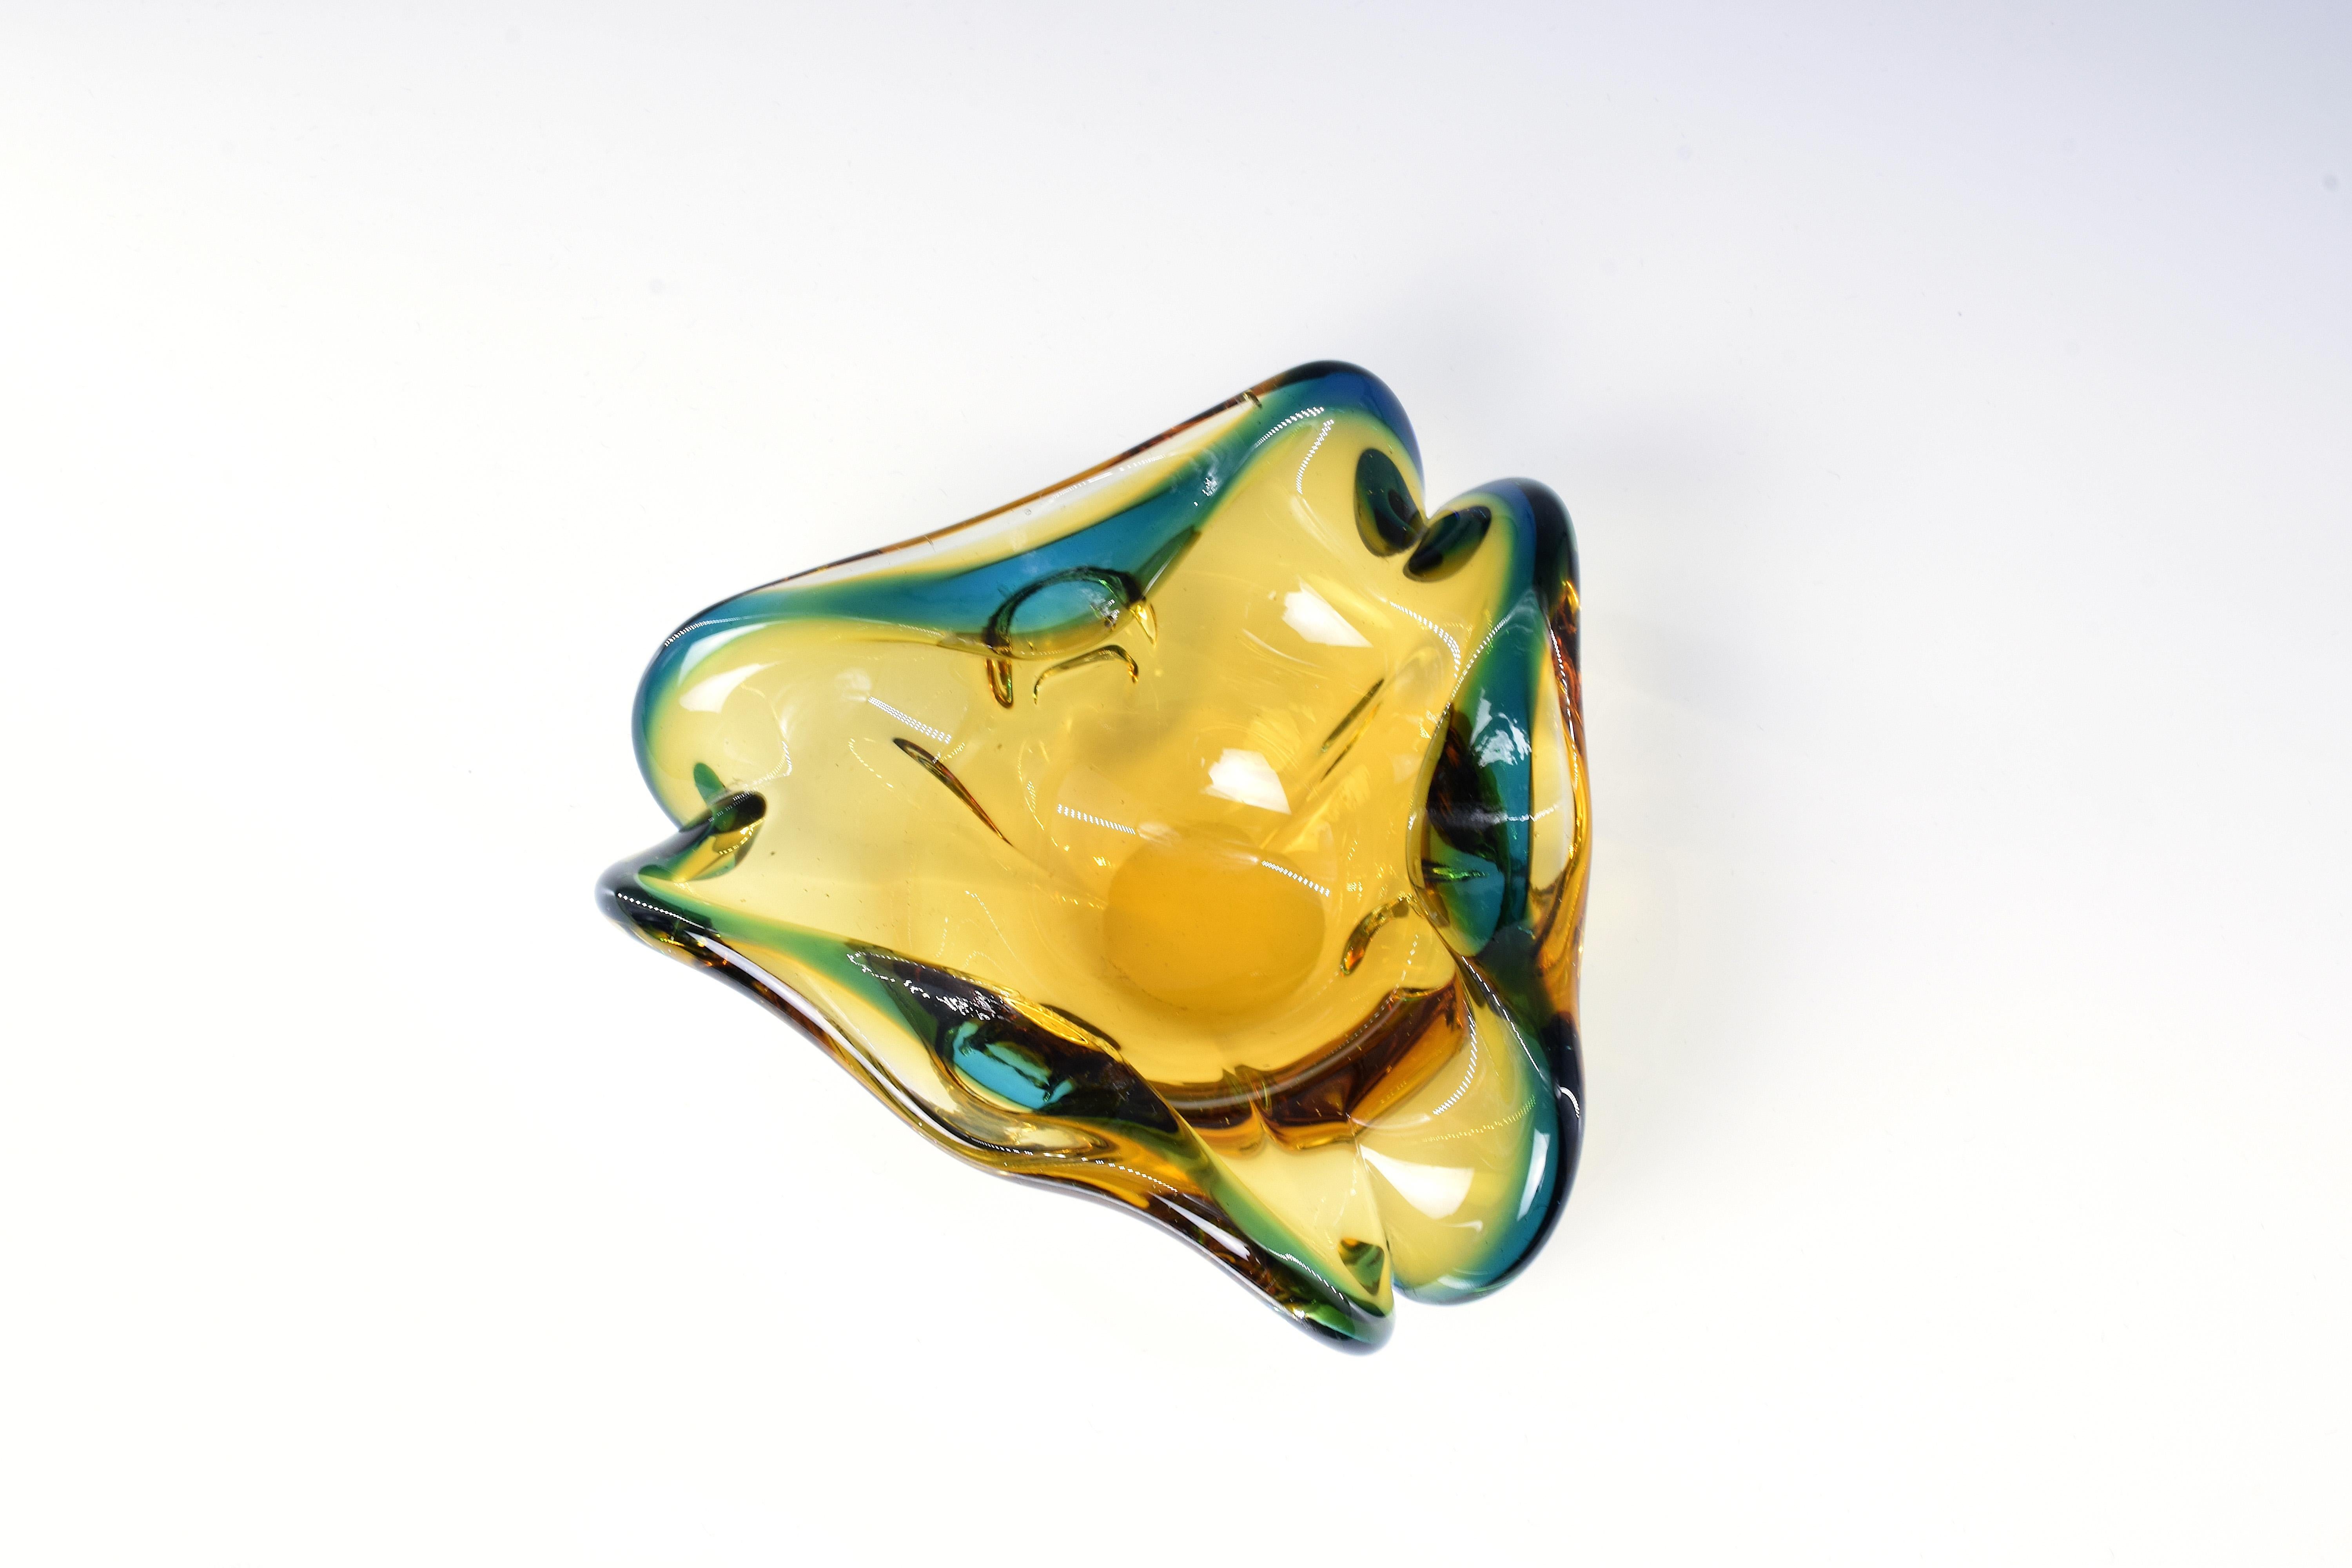 An exquisite small Murano glass decorative bowl in unique shape that could also be used as a stylish ashtray, a perfect add up to your interior decorative collection. This 1970s Murano glass piece is made following the Sommerso technique, which